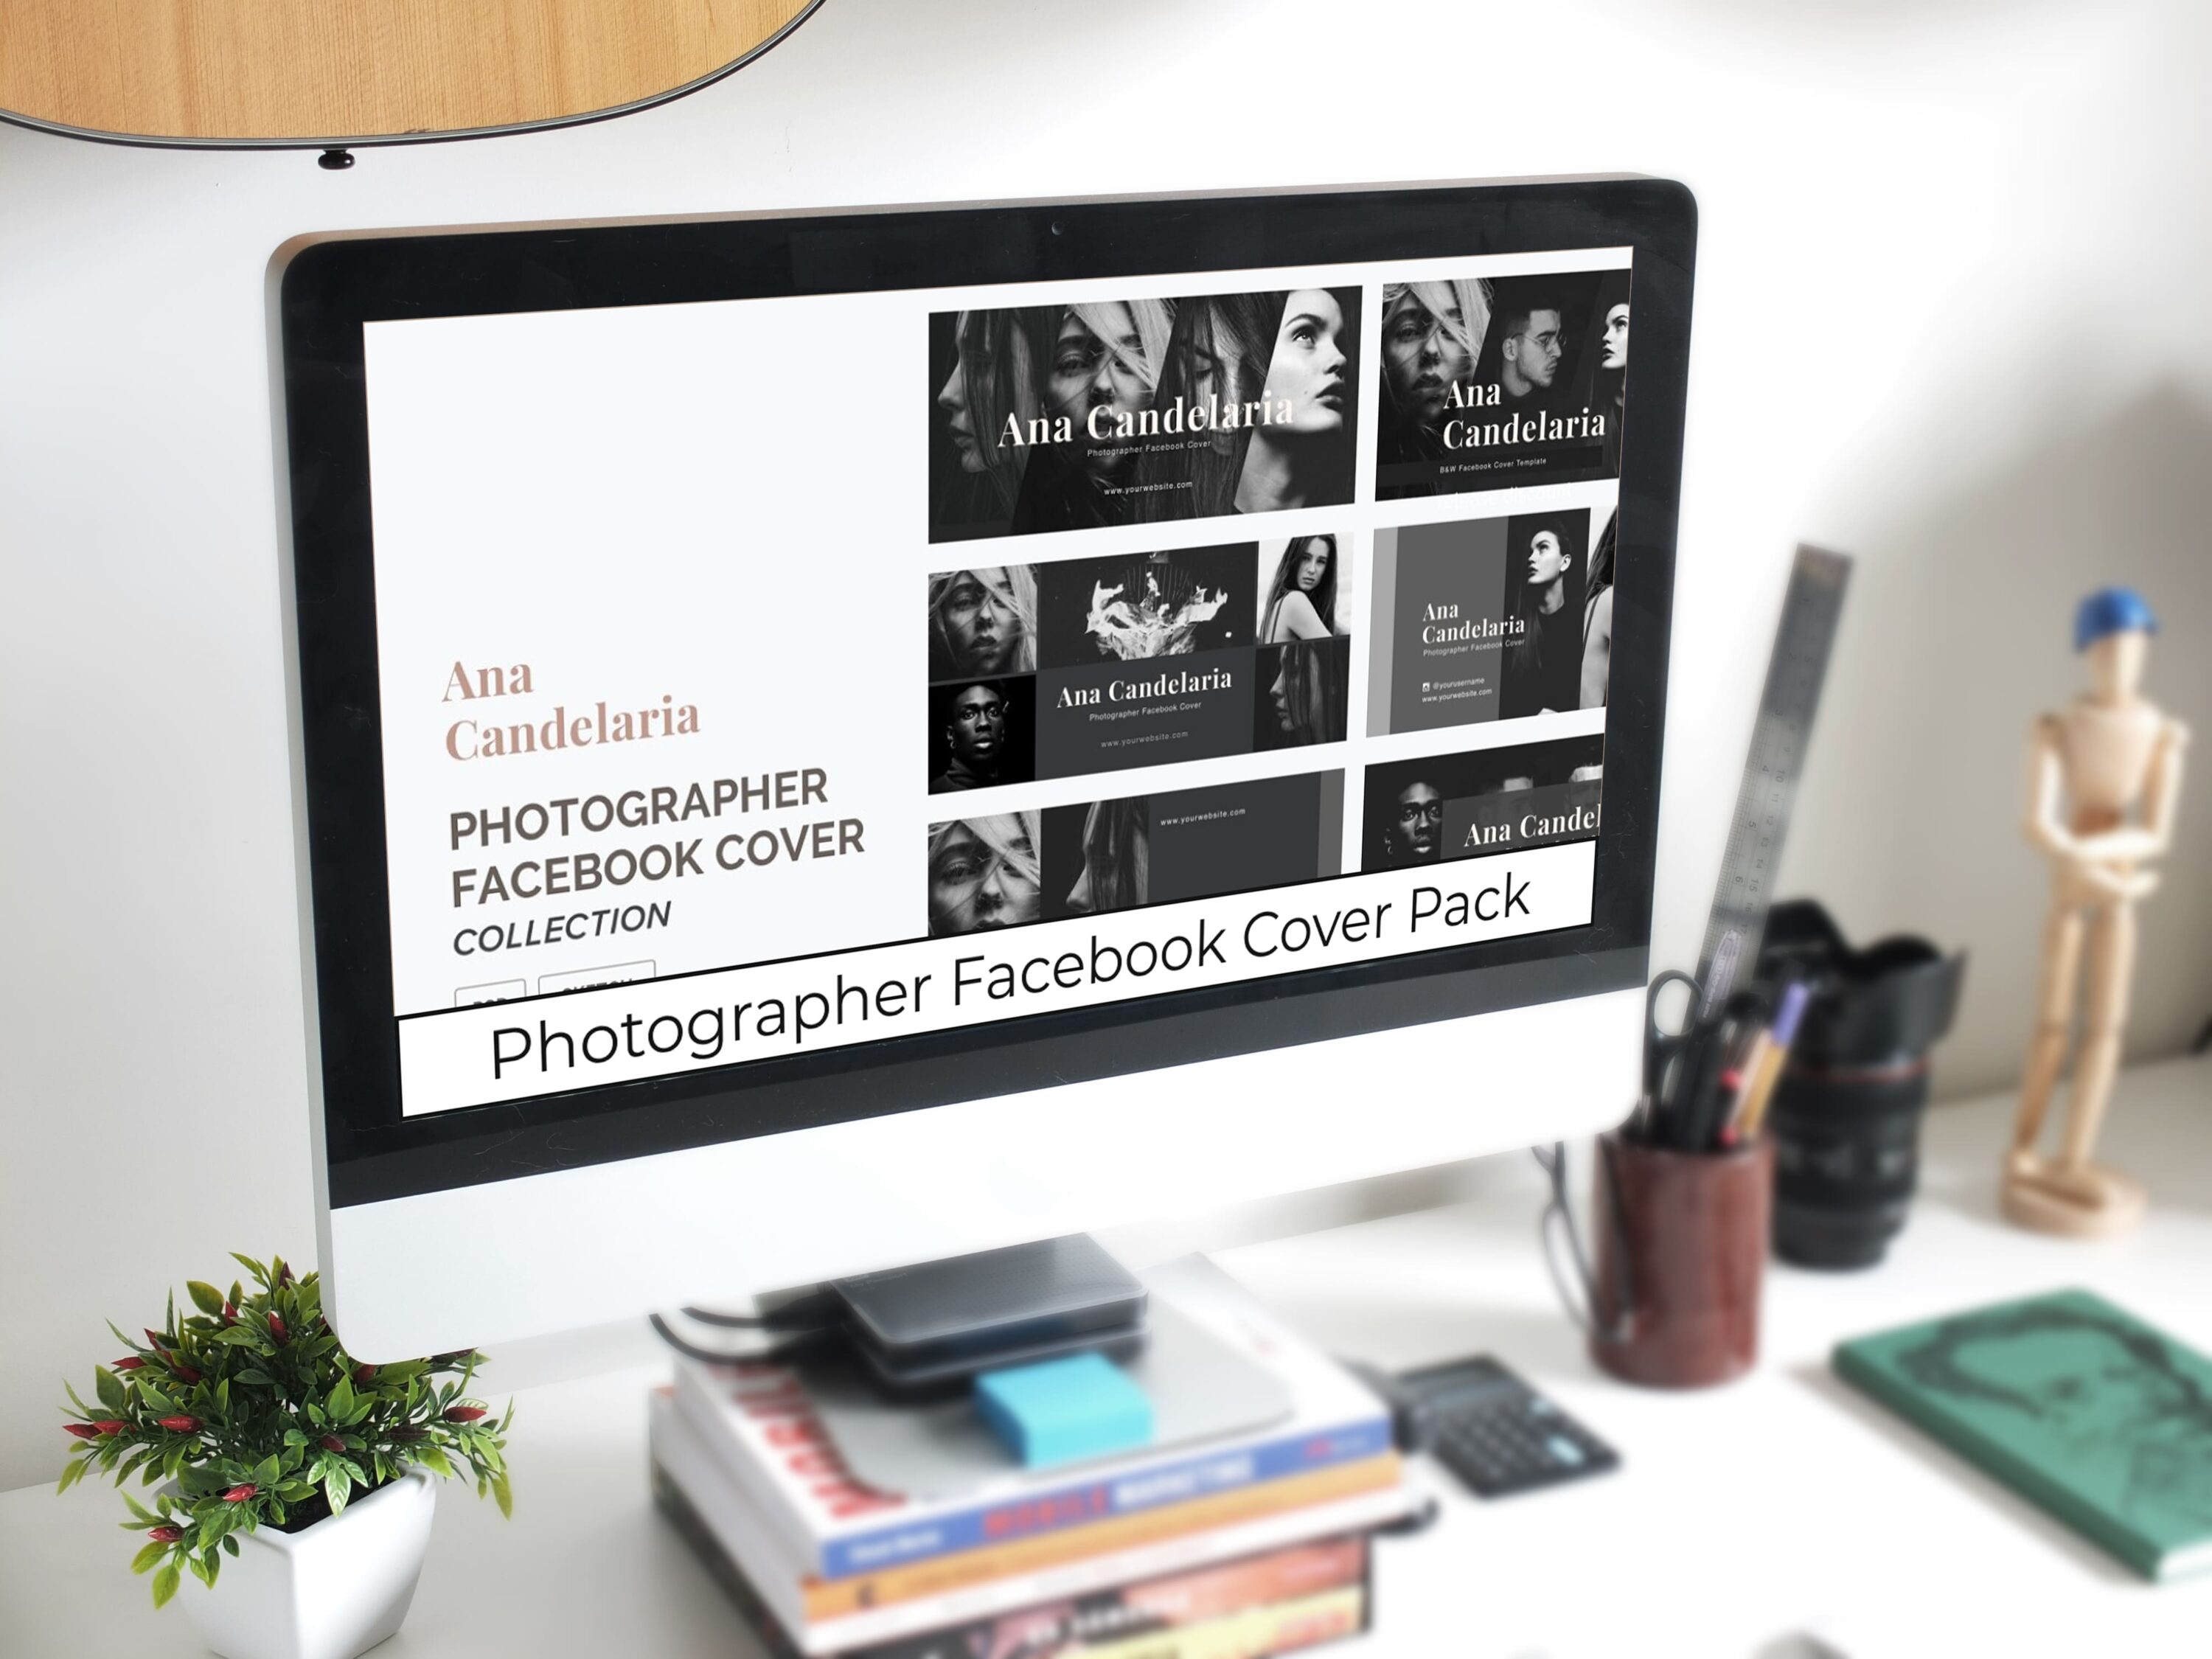 Desktop option of the Photographer Facebook Cover Pack.